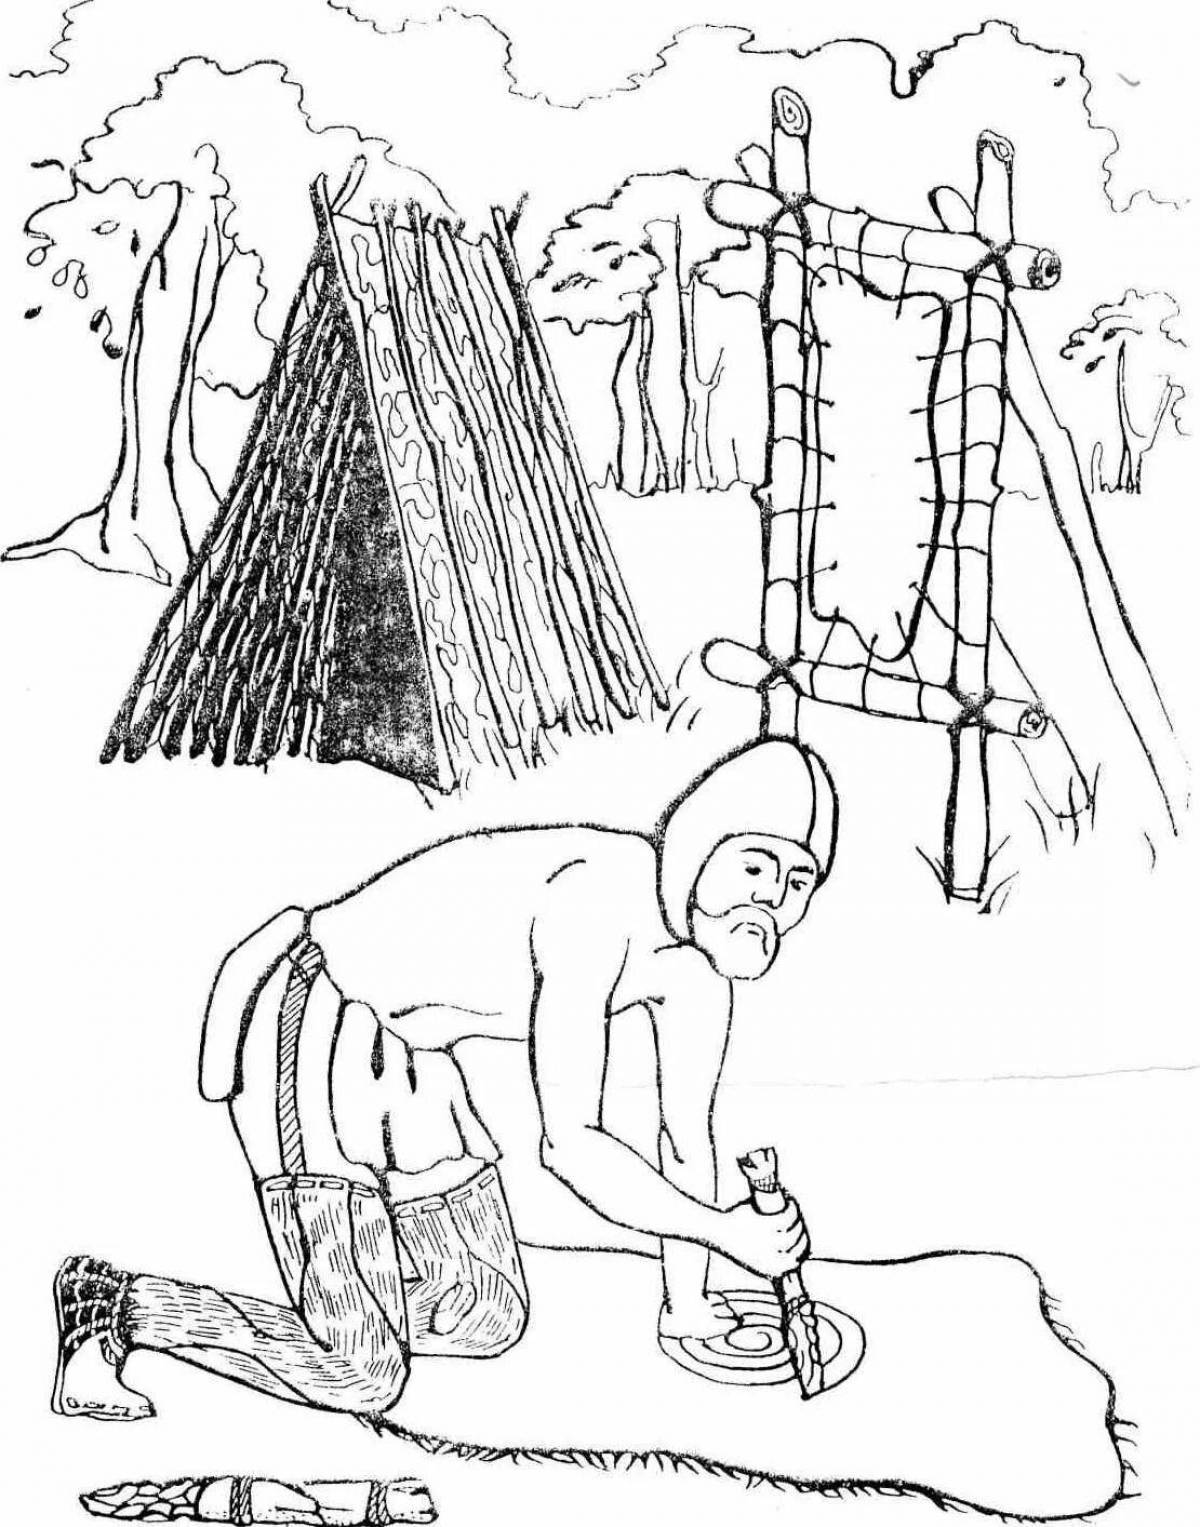 Coloring page spectacular primitive people